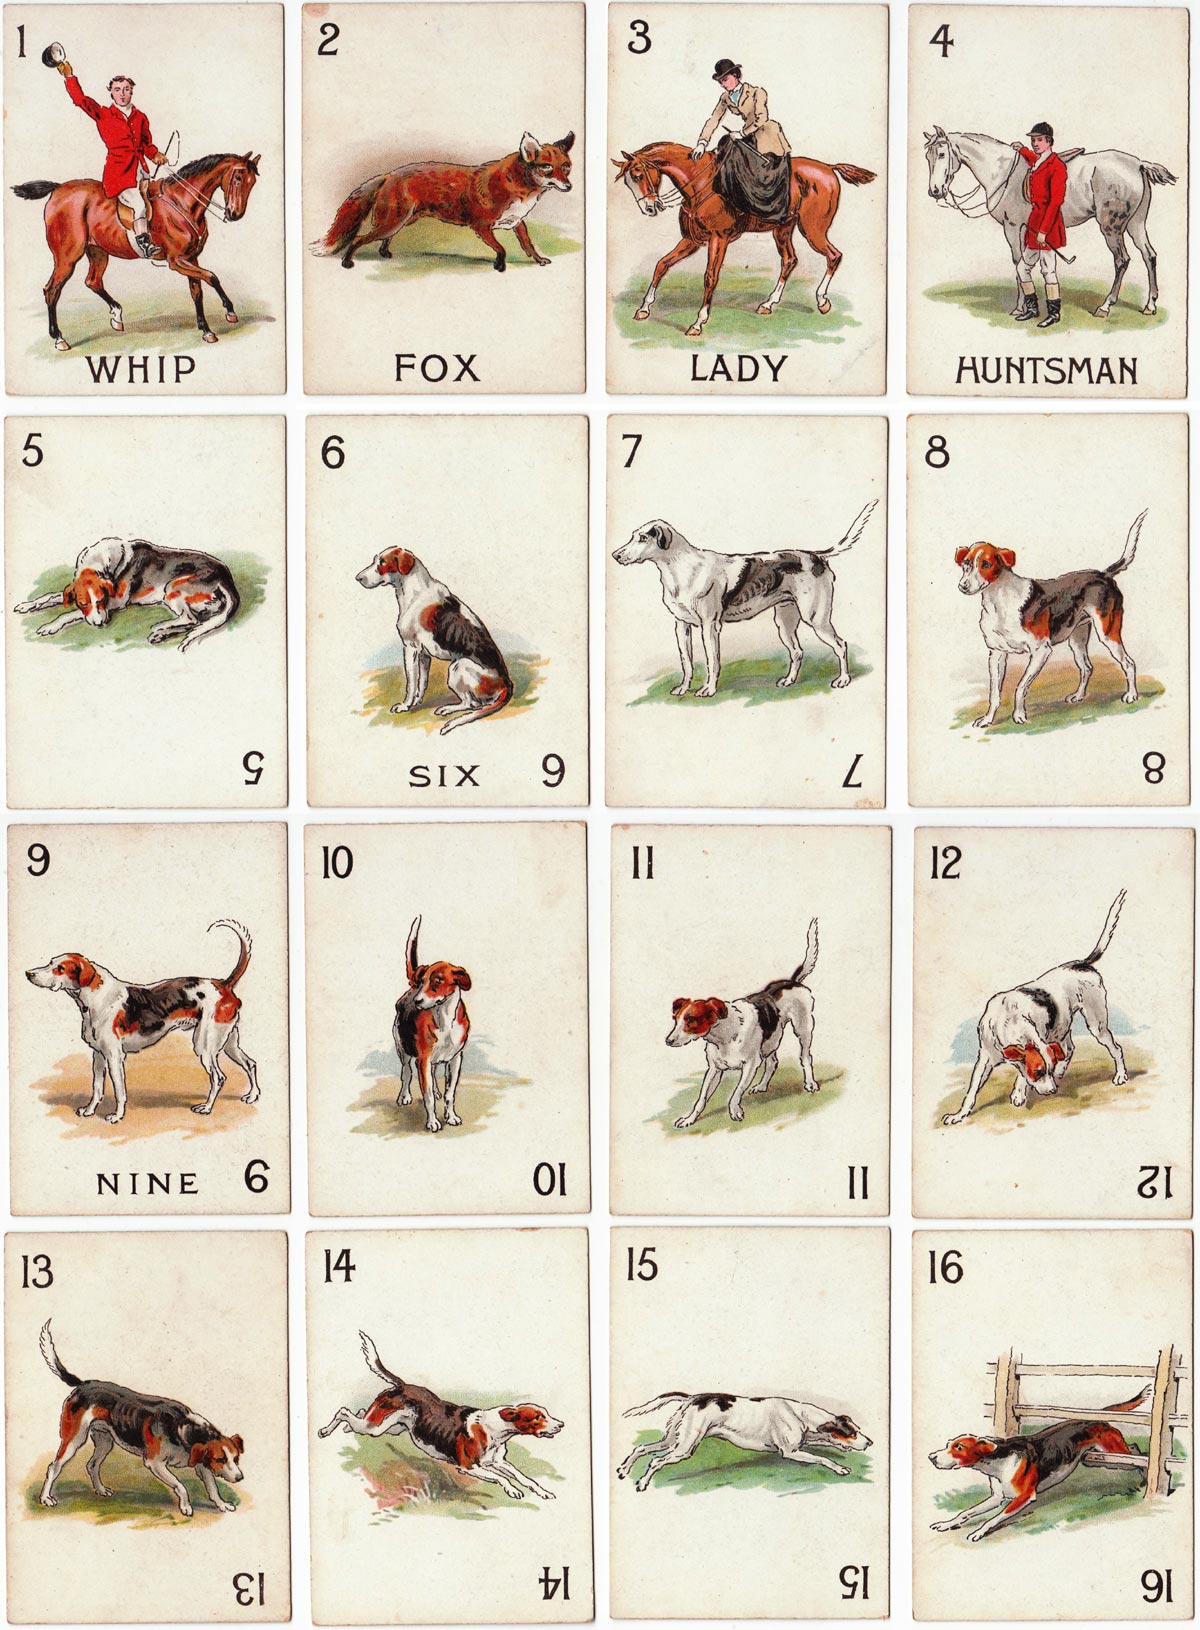 Fox & Hounds card game published by C.W. Faulkner & Co., c.1899